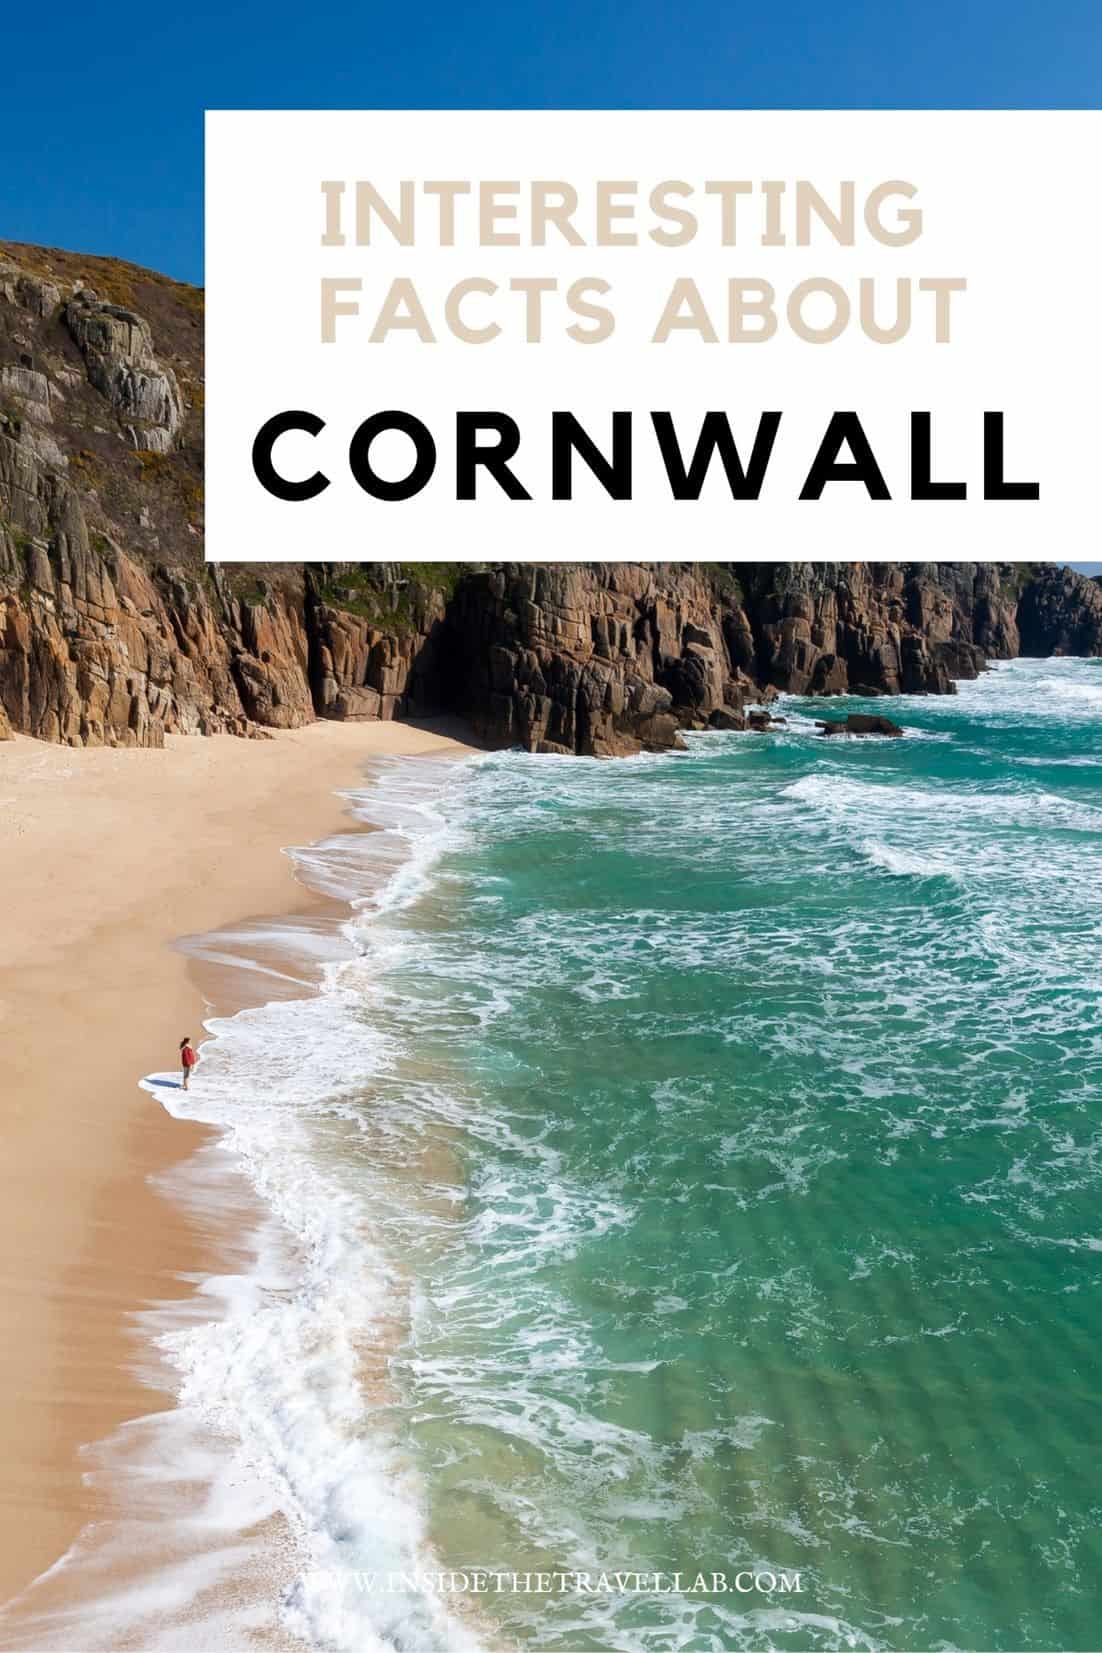 Interesting facts about Cornwall cover image